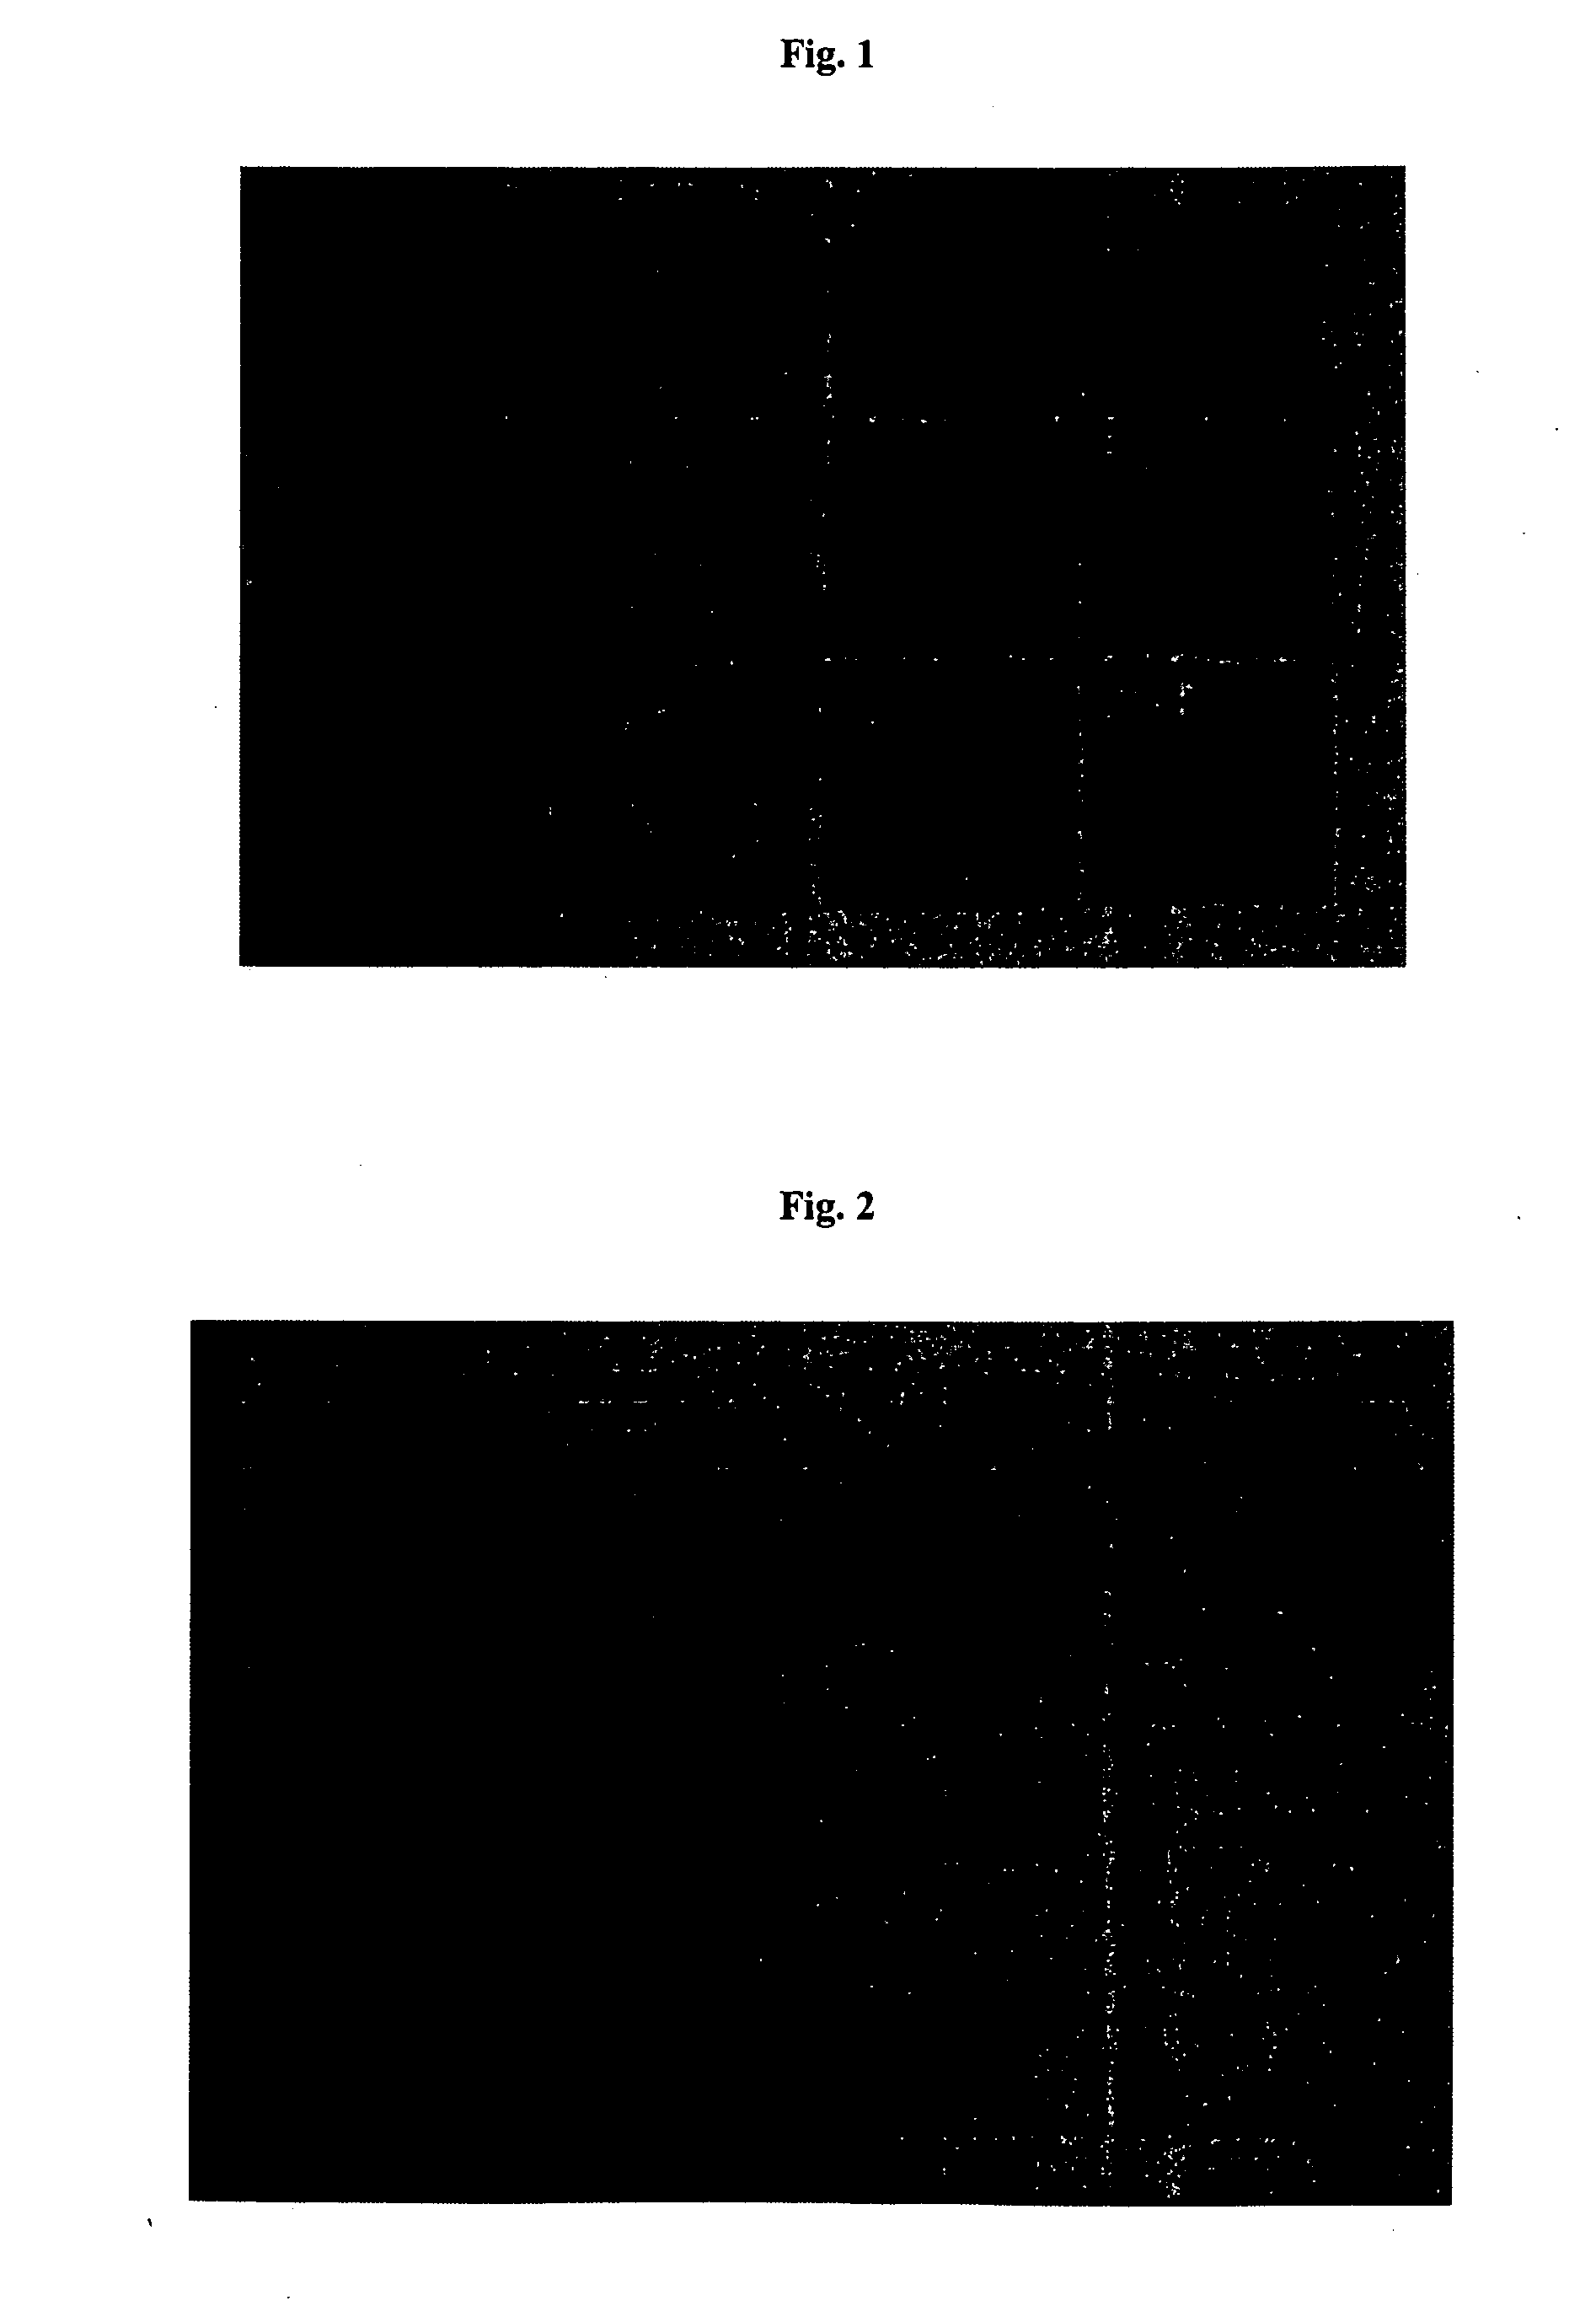 Process for printing images on dark surfaces